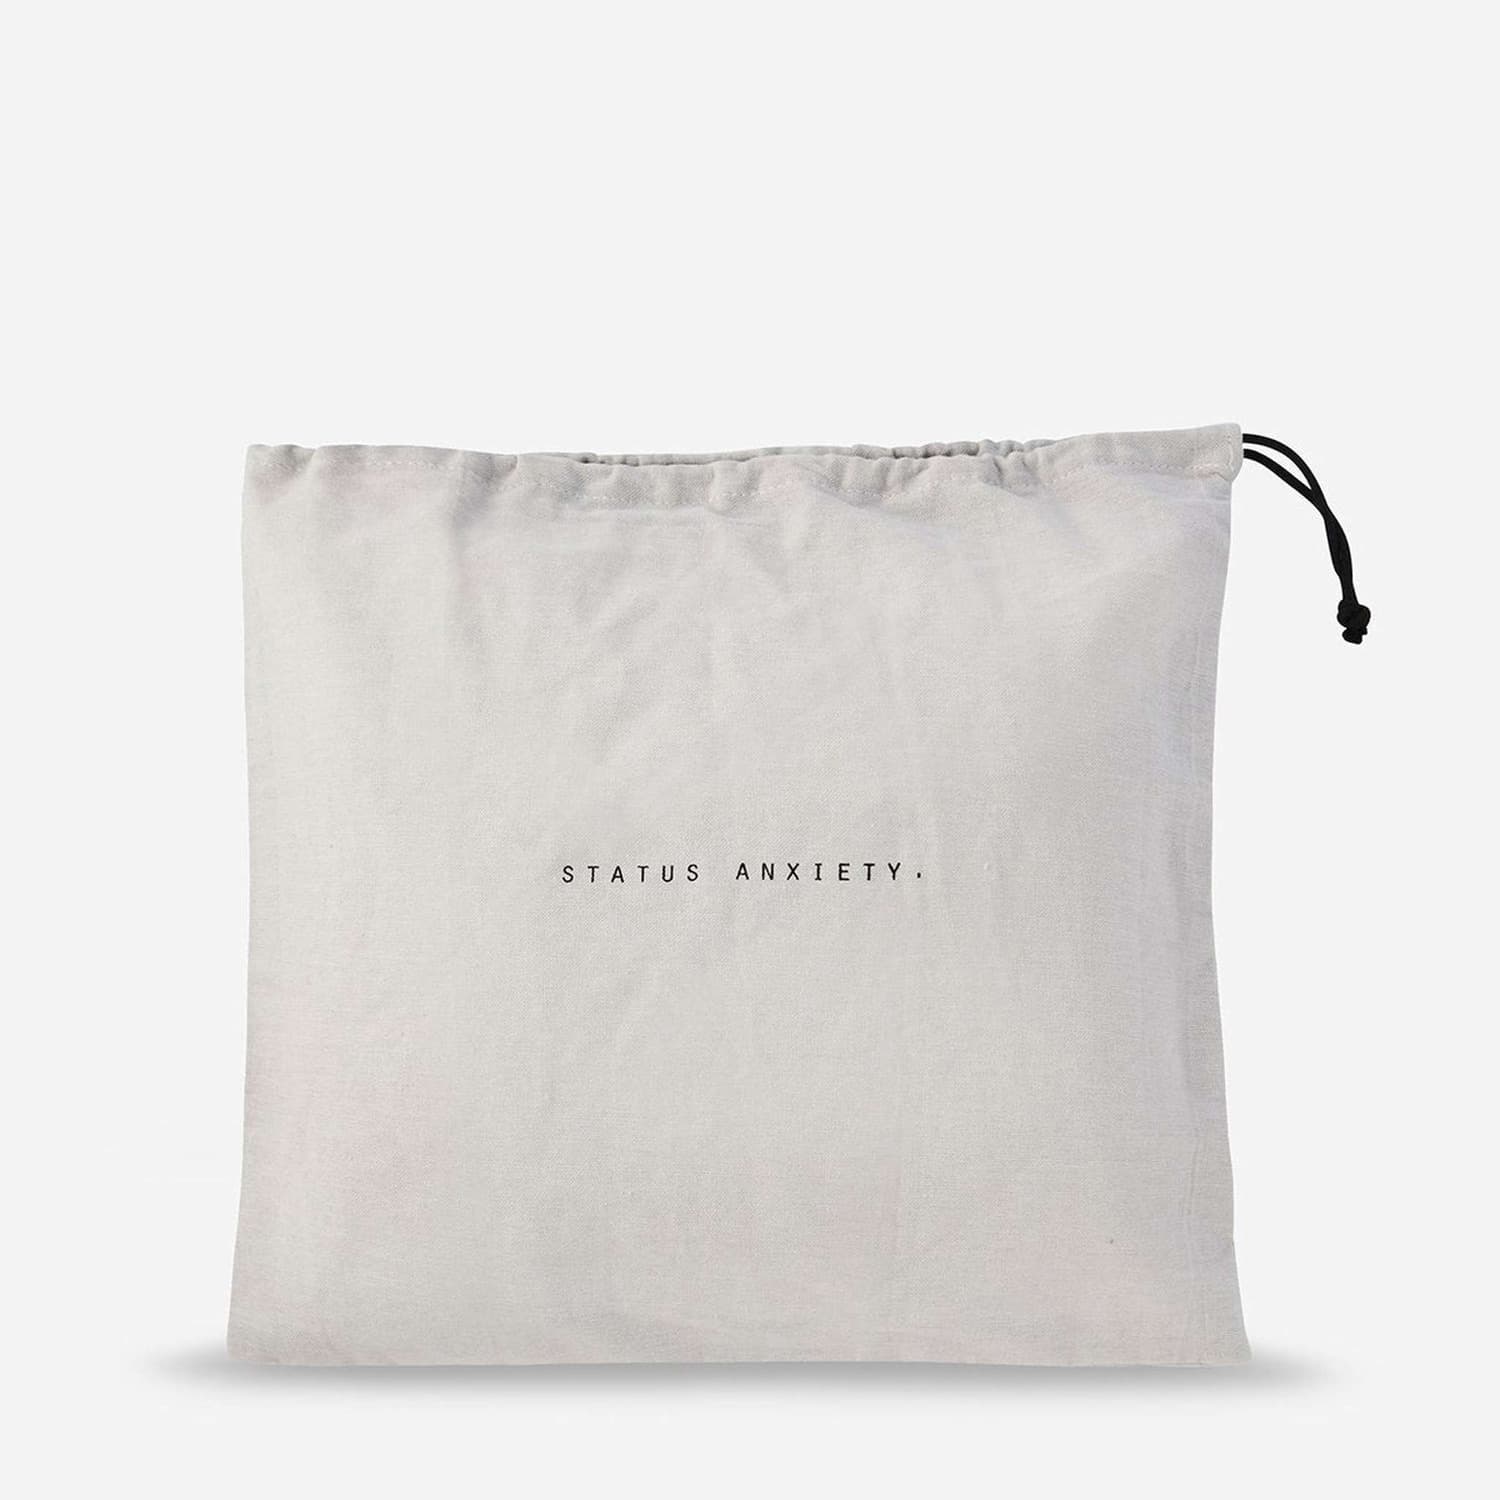 Status Anxiety Dust Cover Bag